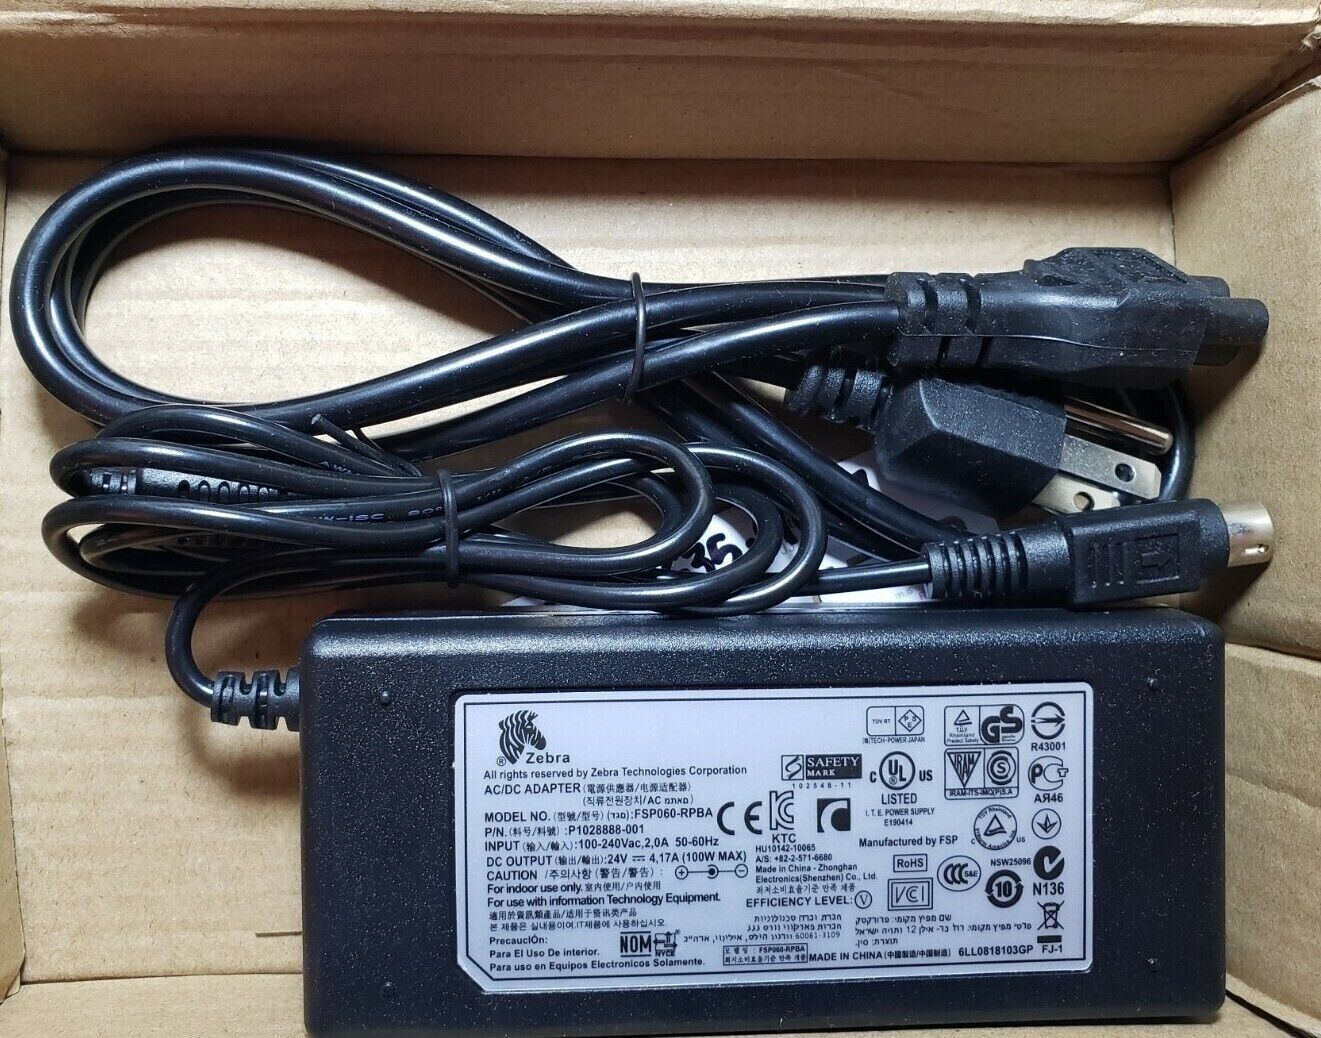 AC Adapter Charger For BIXOLON SRP-350PG Thermal Receipt Mini Printer Power Cord P/N: FSP100-RDB model no: 808101-00